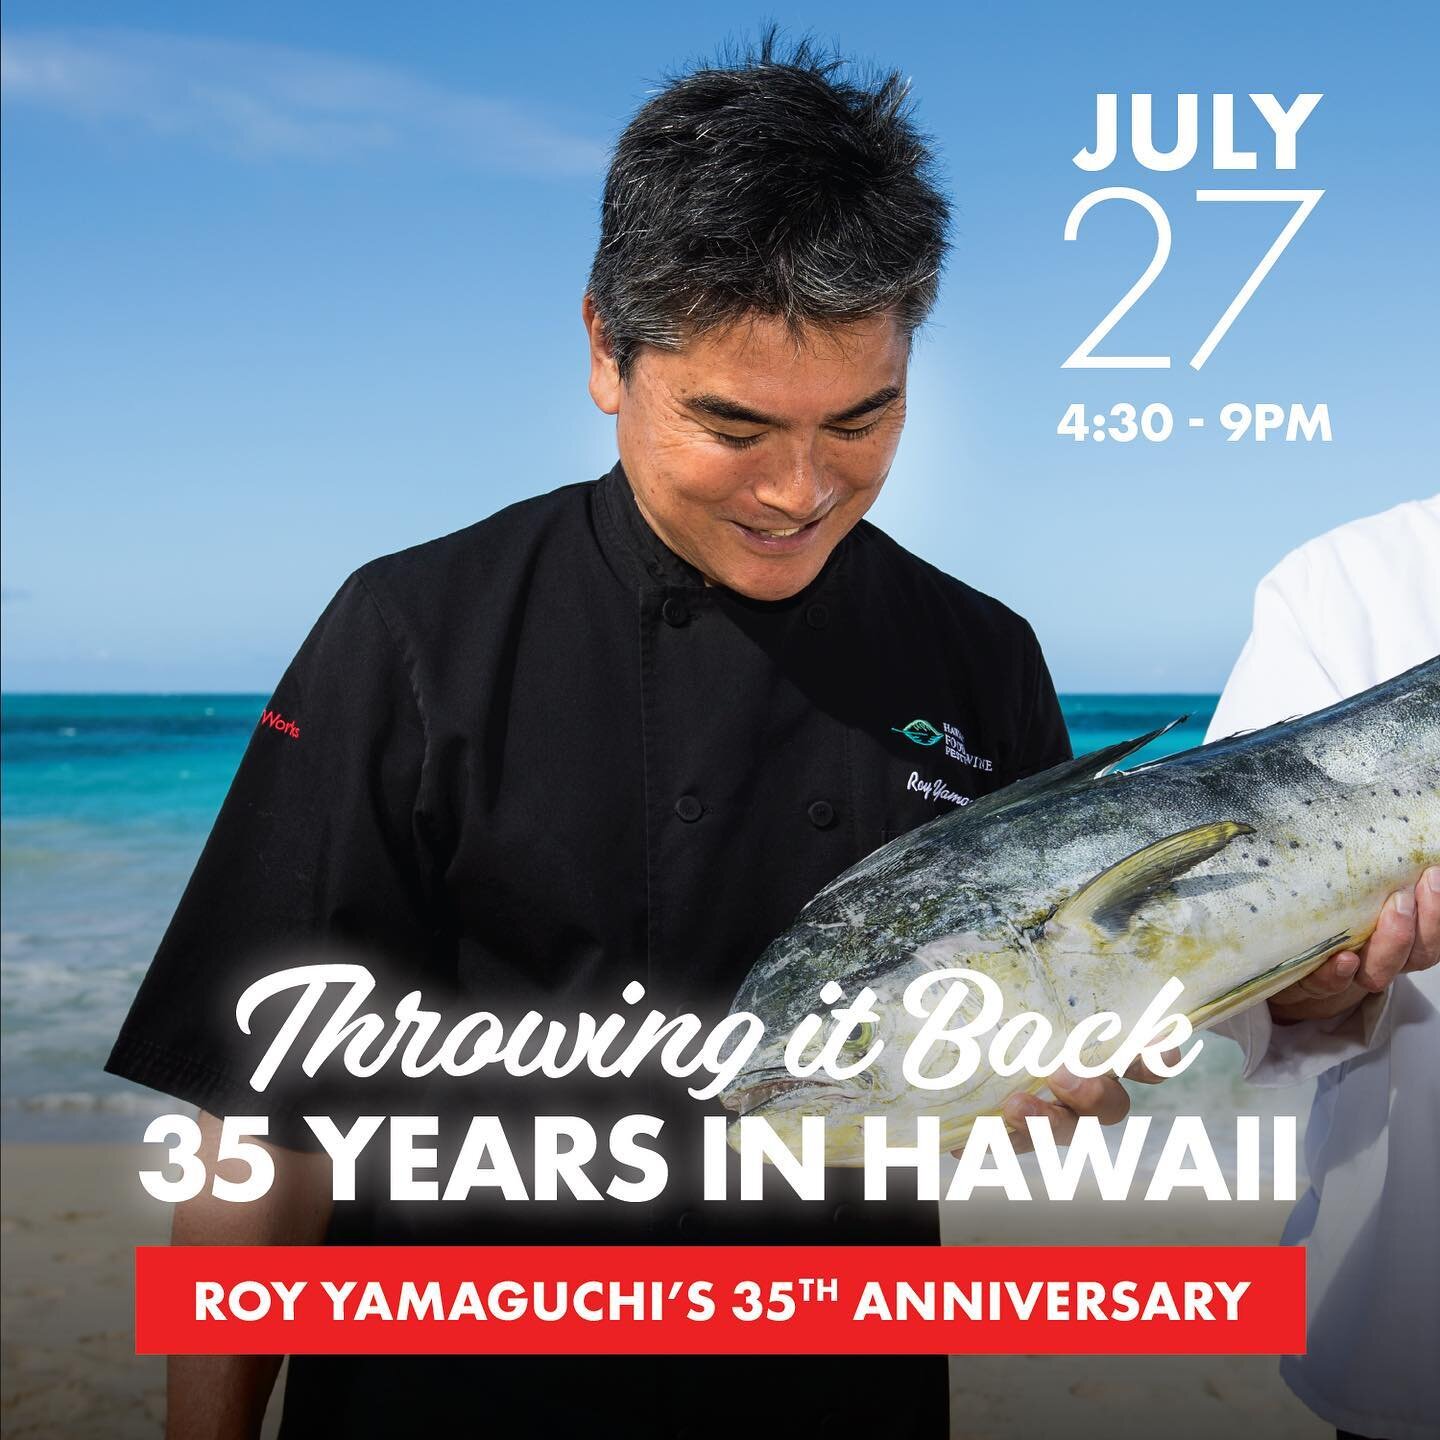 Join us July 27th as we honor Chef Roy Yamaguchi&rsquo;s 35th business anniversary in Hawaii. Chef Roy himself will be there to greet guests and make this occasion truly memorable. Indulge in our specially curated prix fixe menu for $99 that encapsul